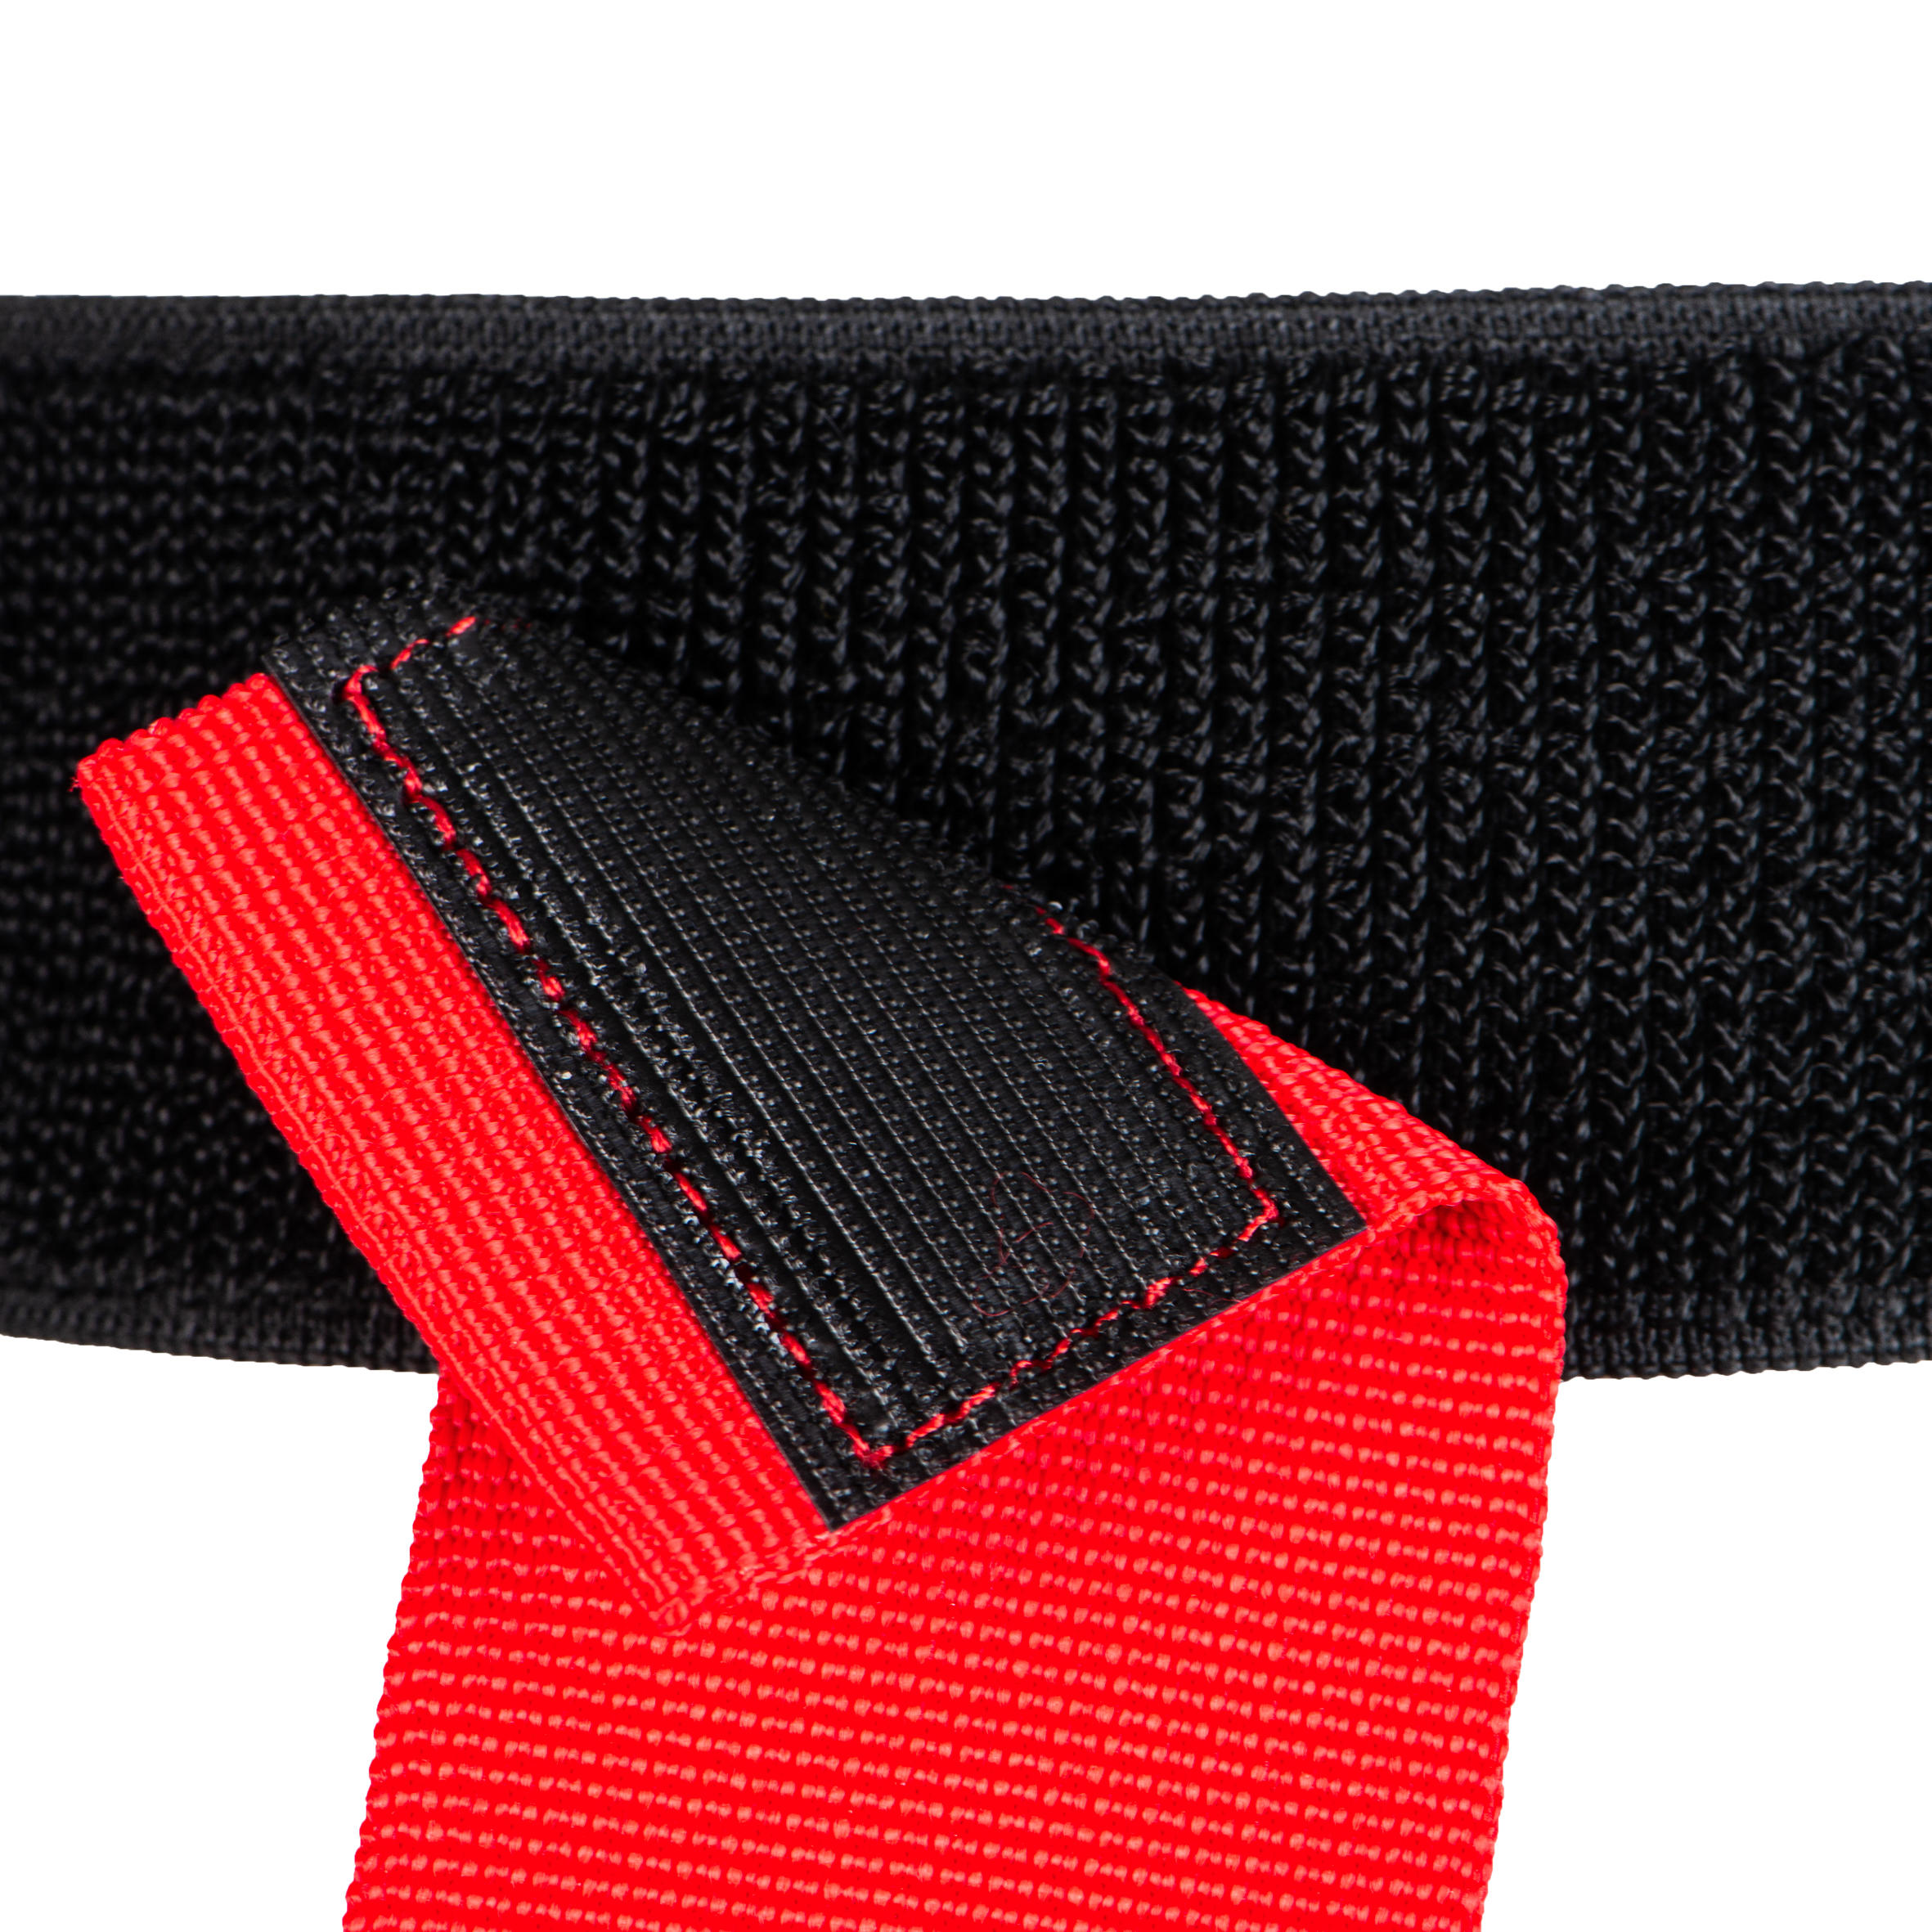 Tag Rugby Belt Kit R500 - Blue/Red 6/10